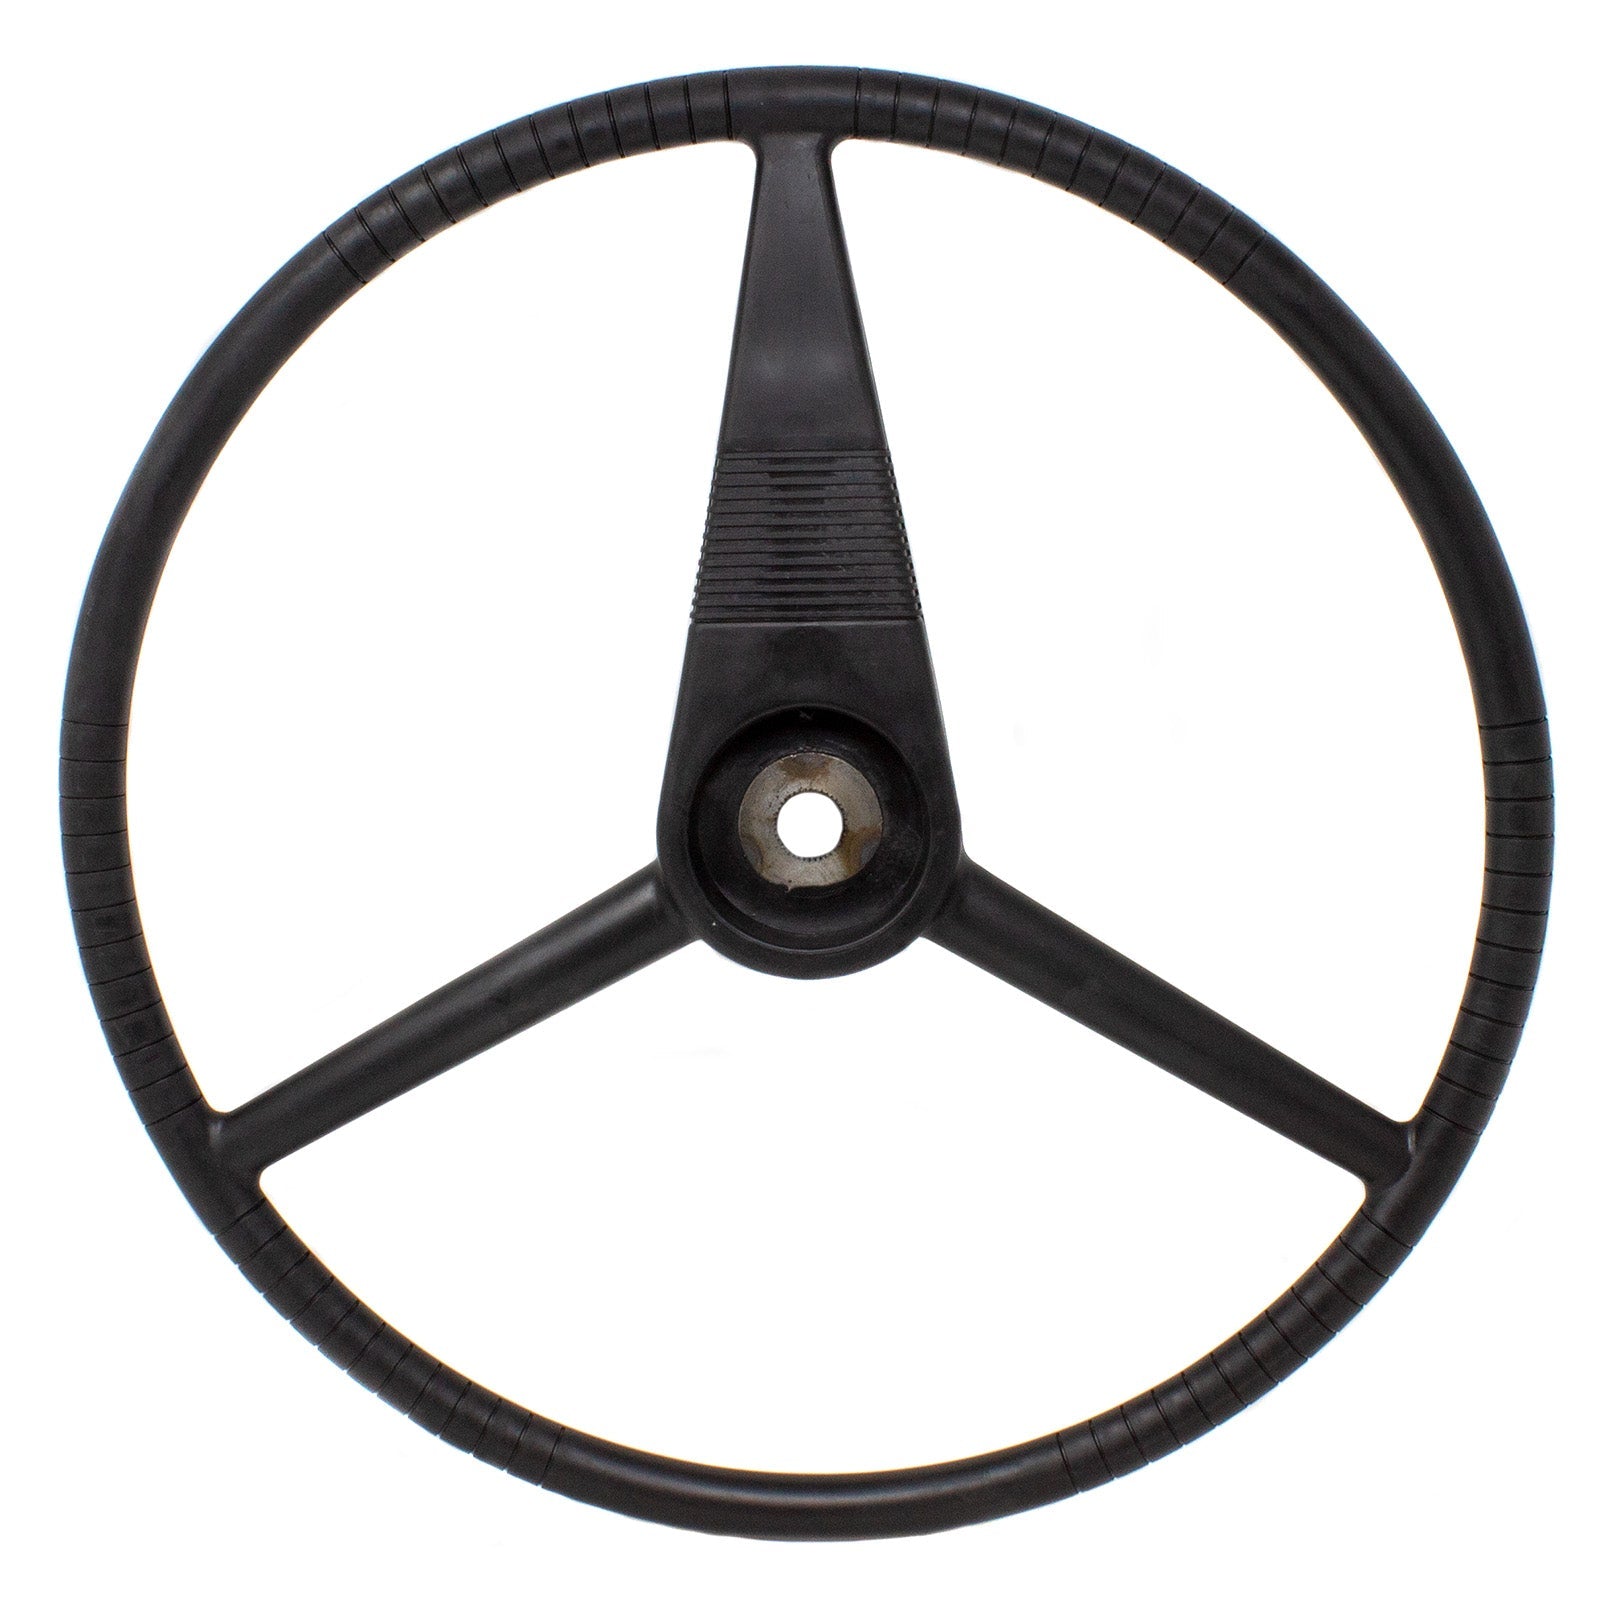 Duraforce A20456, Steering Wheel For Case